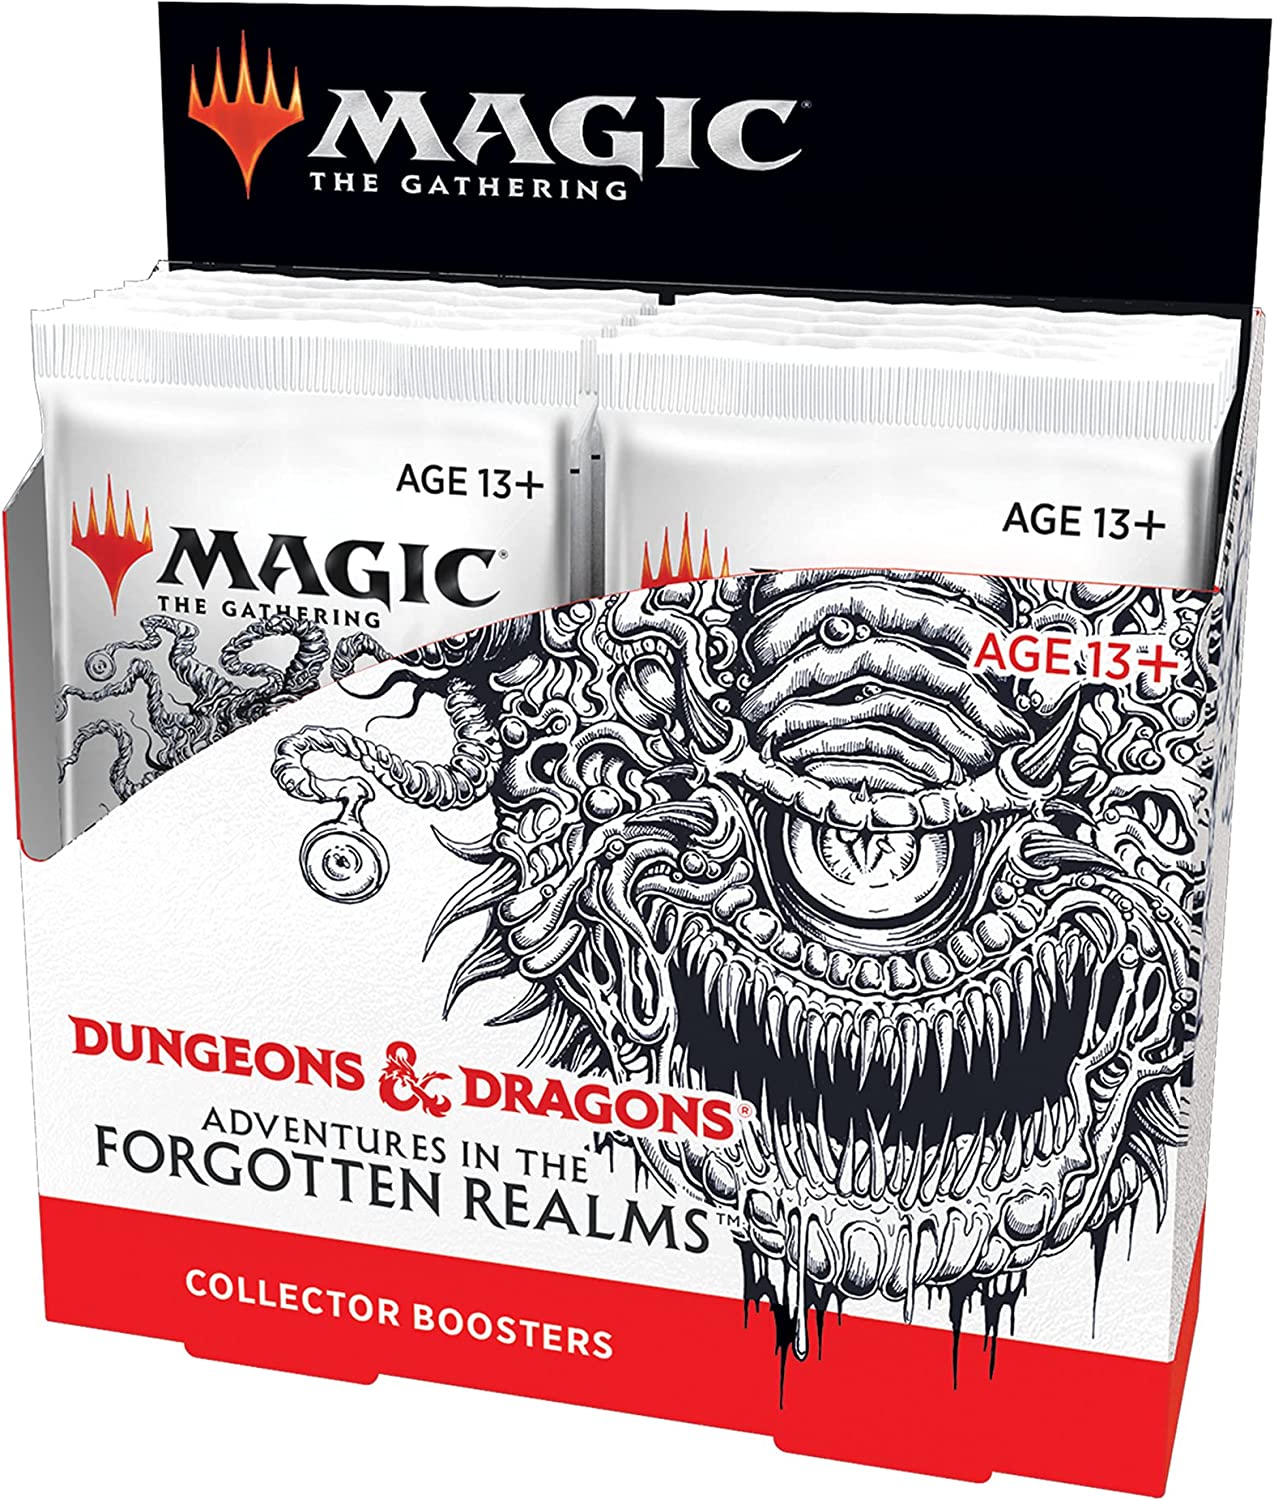 Magic: The Gathering Collector Booster Box Case - Adventures in The Forgotten Realms (Case of 6)